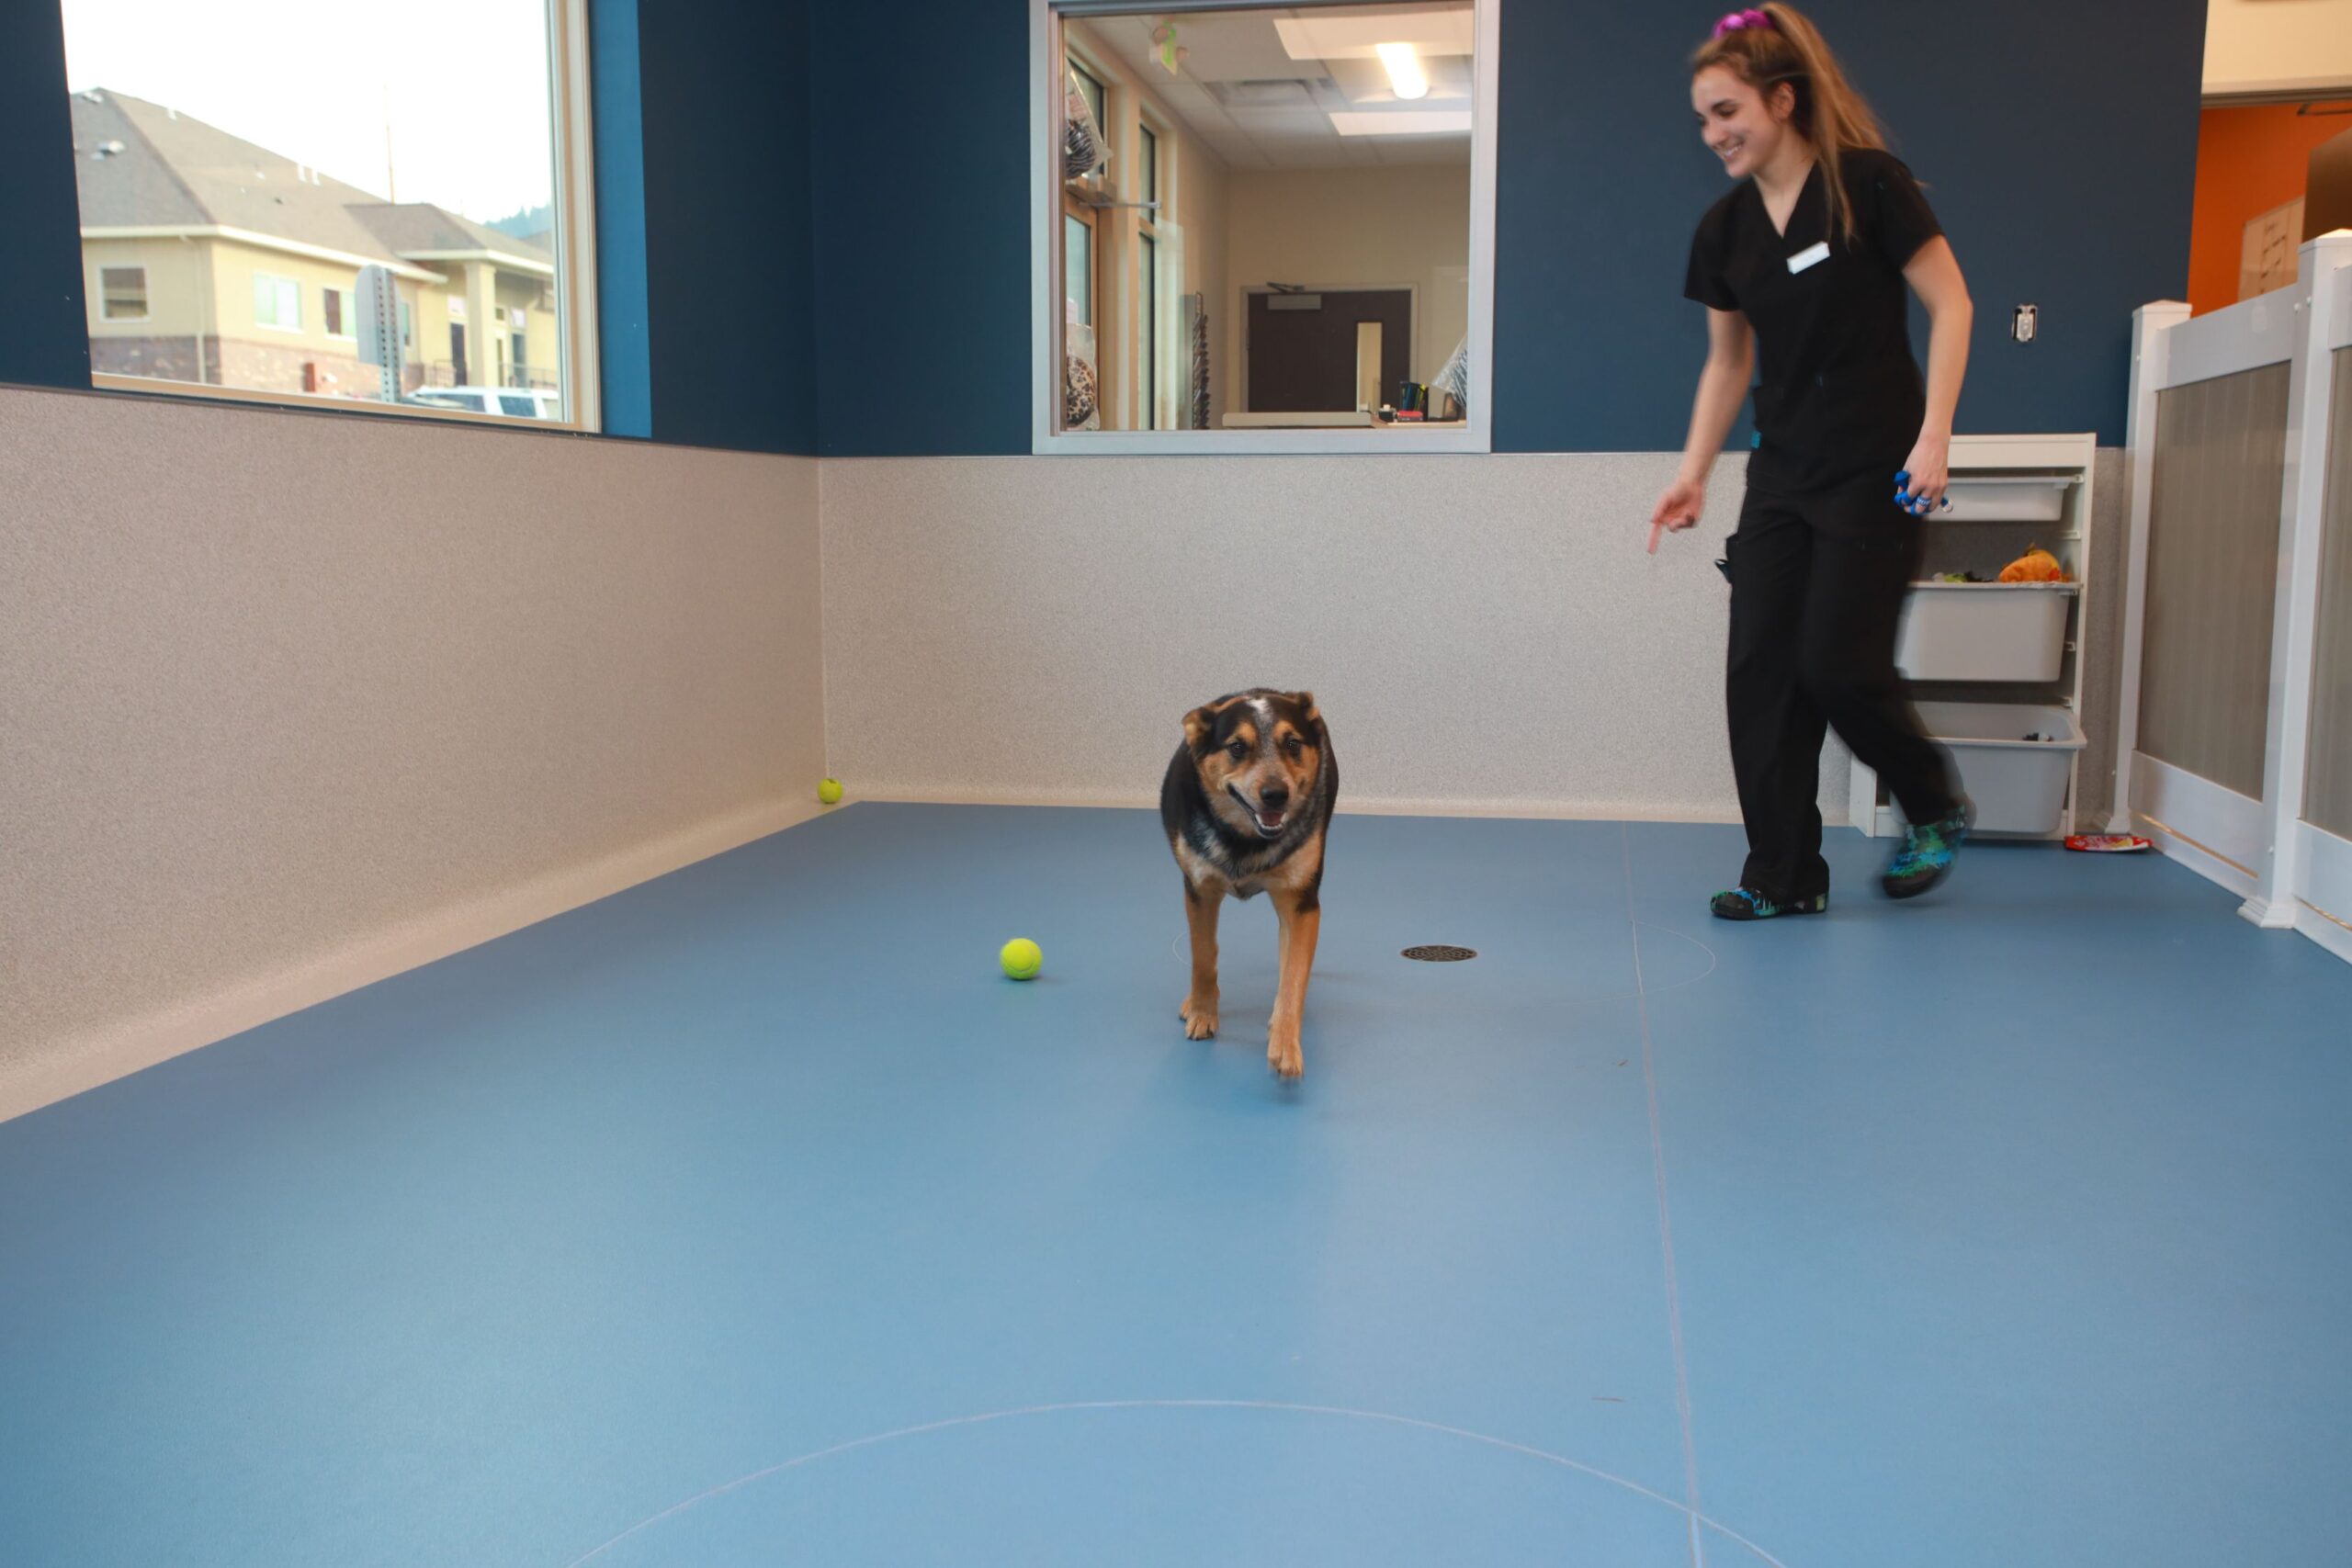 Vet with dog in play area